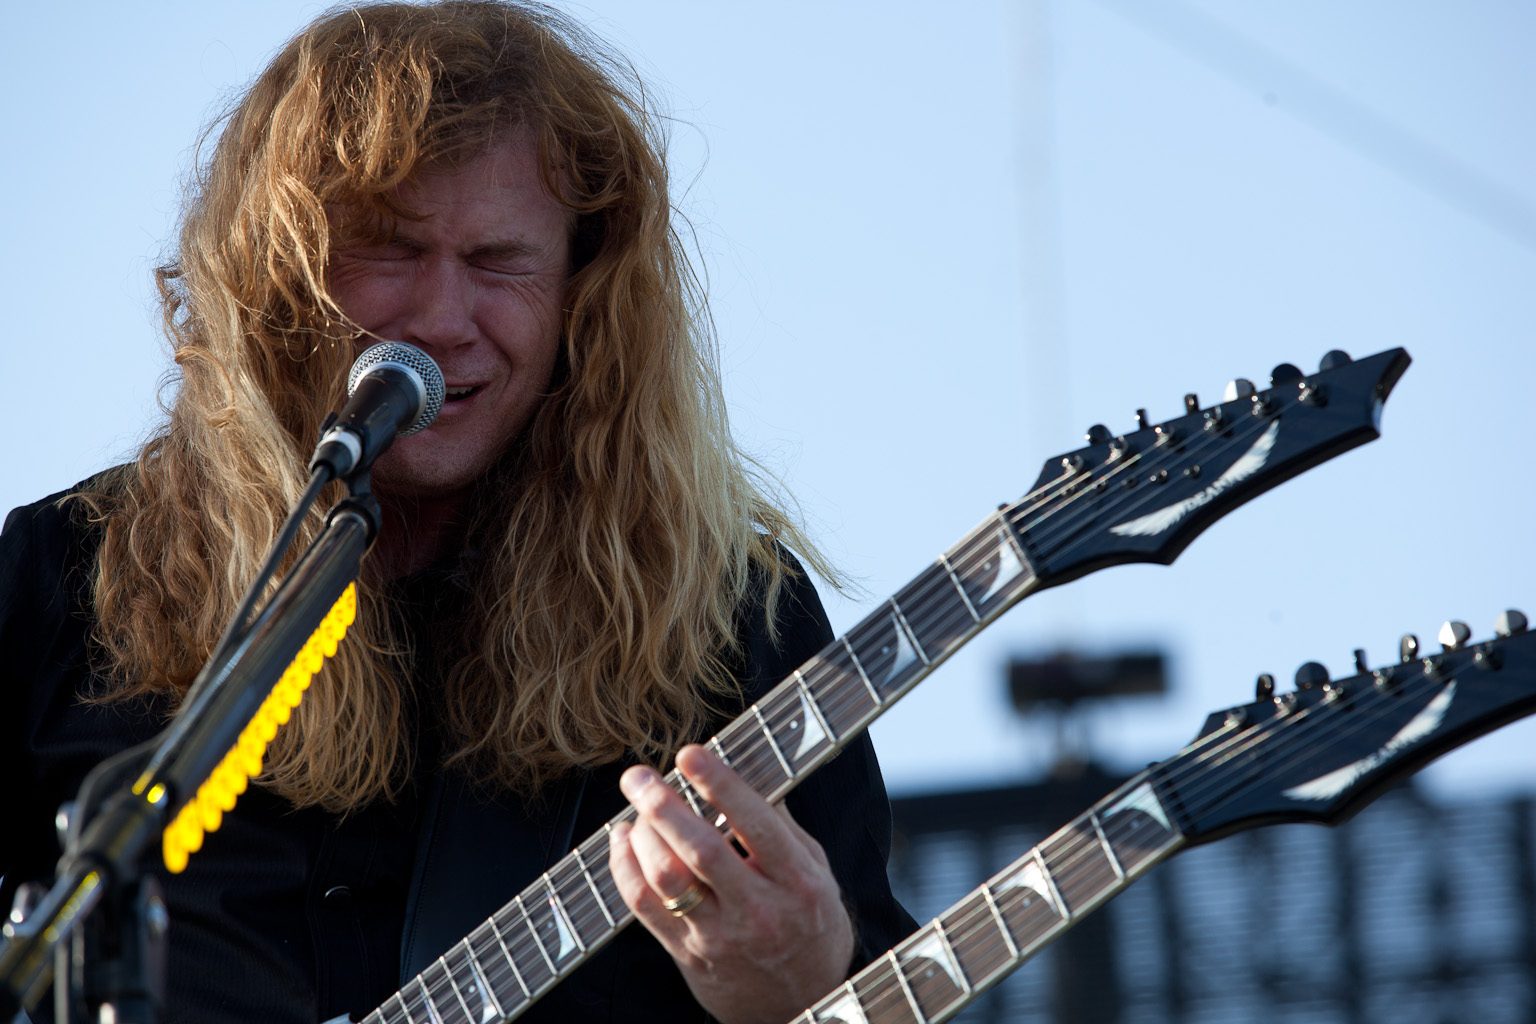 Dave Mustaine Reveals Anticipated Release Date For New Megadeth Album The Sick, The Dying… And The Dead!